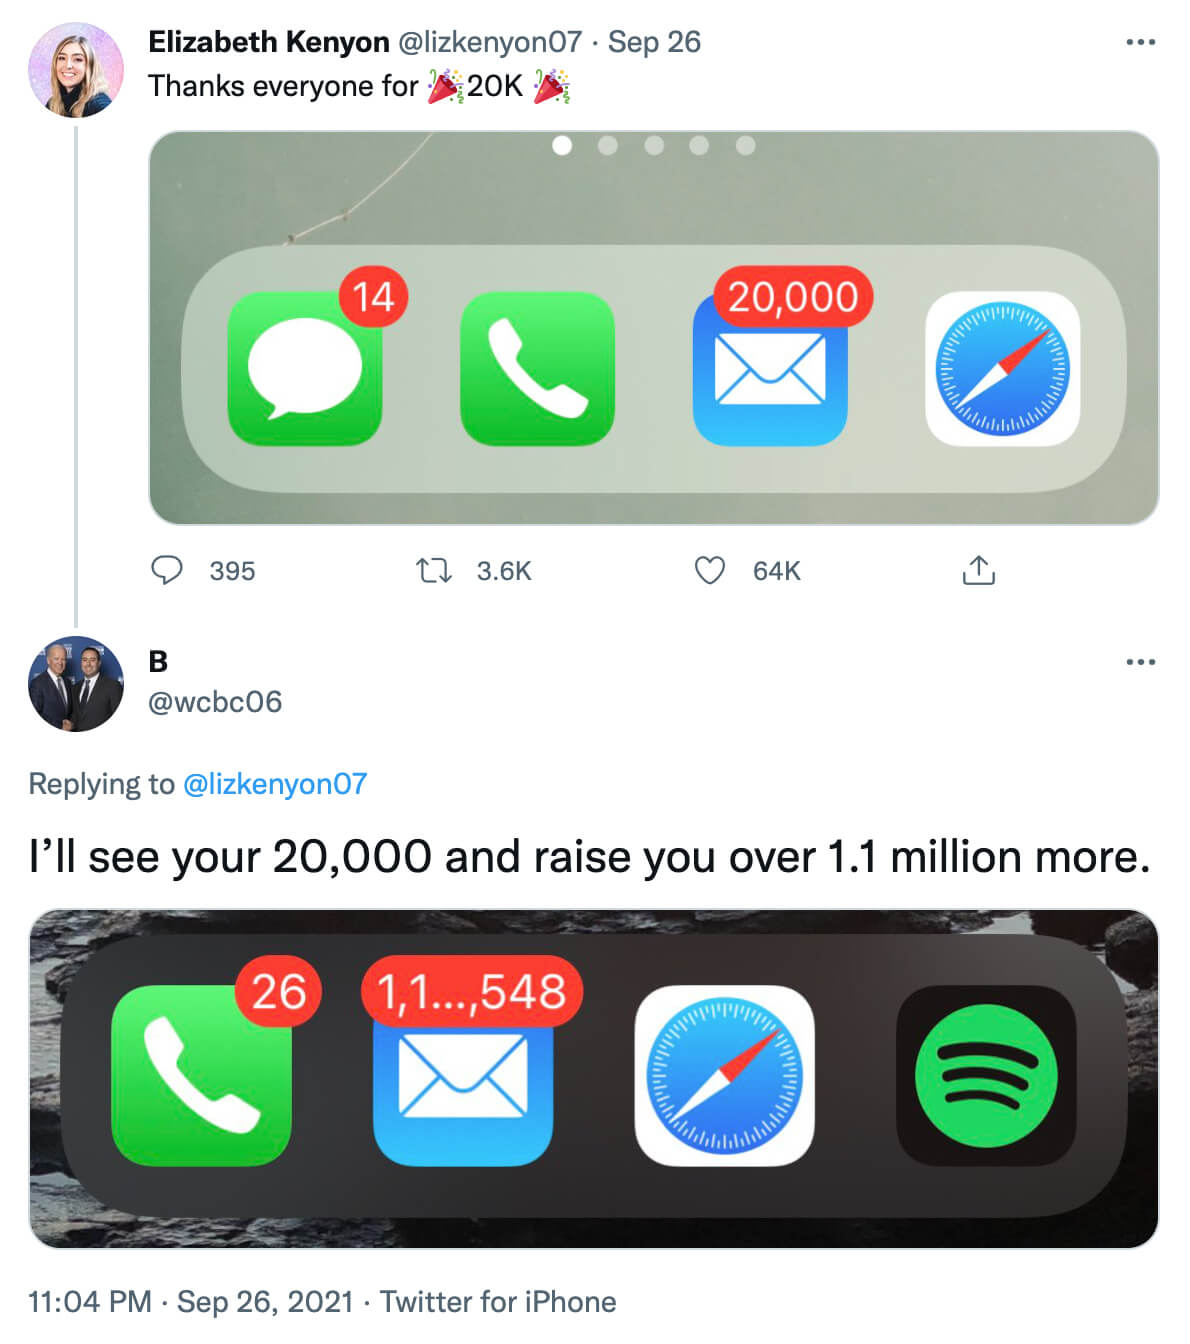 @lizkenyon07: Thanks everyone for 20K - screenshot of 20K email notifications; @wcbc06 replying: I'll see your 20,000 and raise you over 1.1 million more. - screenshot of over 1.1 million email notifications